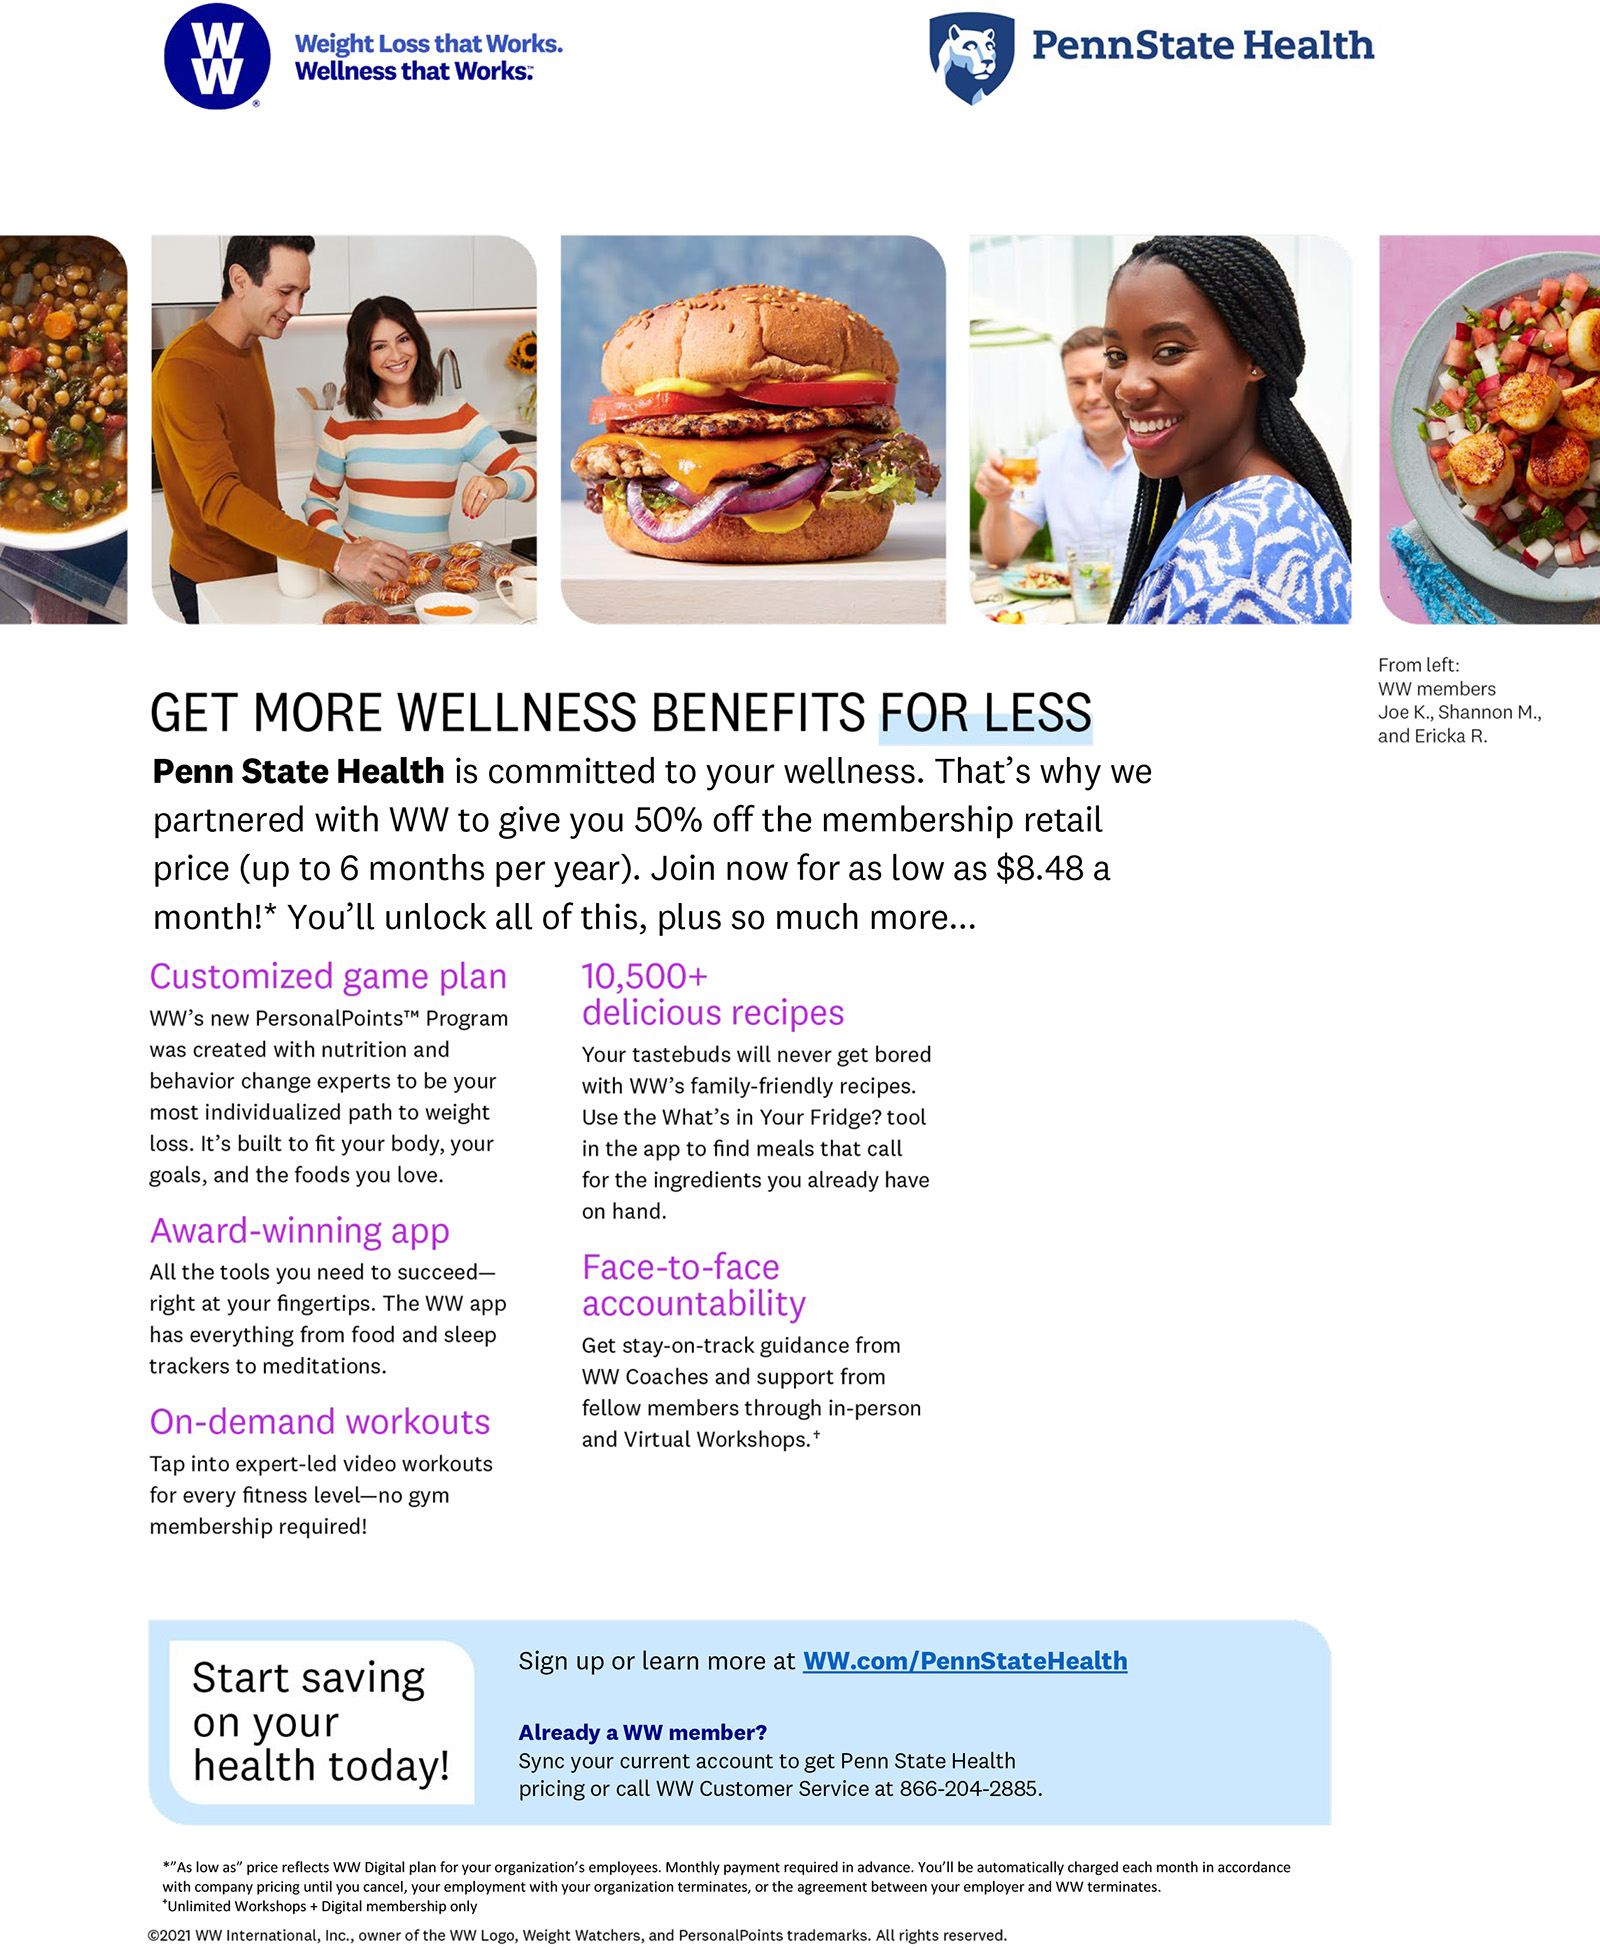 Thumbnail of flyer with information about Weight Watchers for Penn State Health employees, link to open PDF 